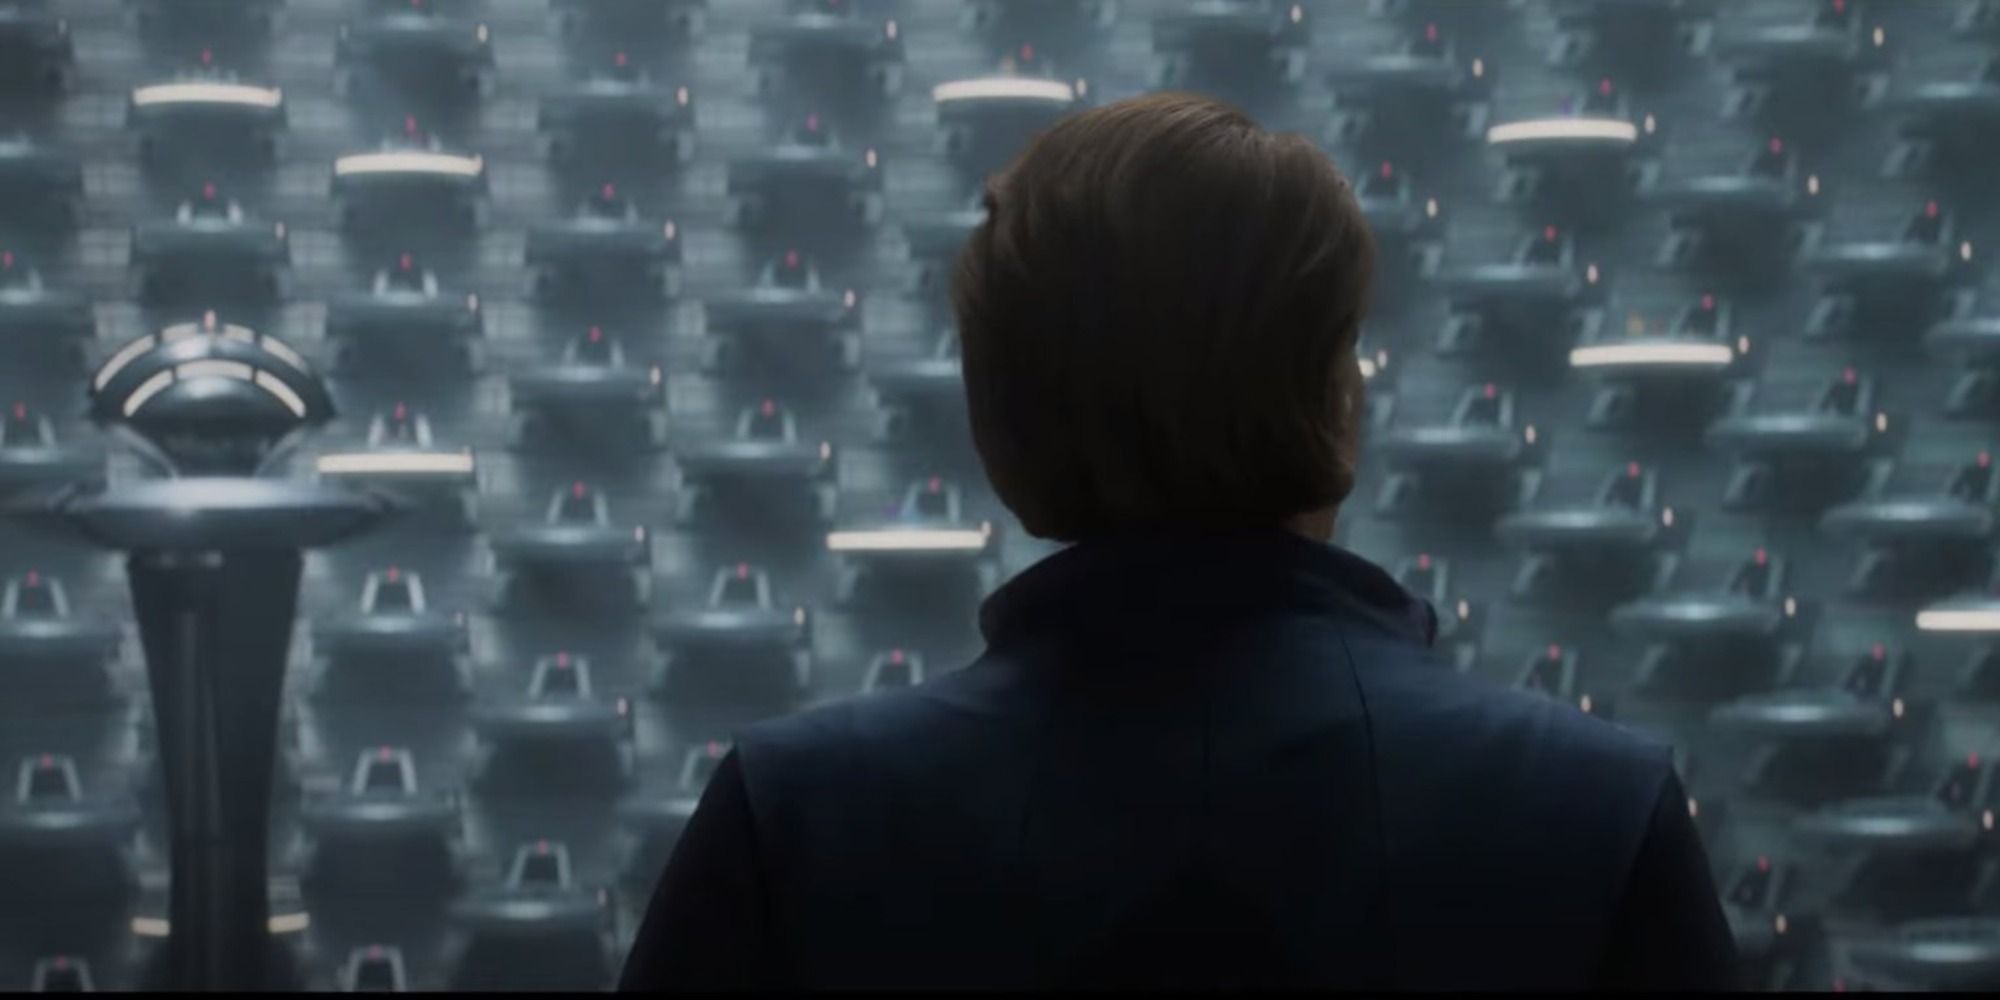 Mon Mothma appears before the Senate in Andor trailer.